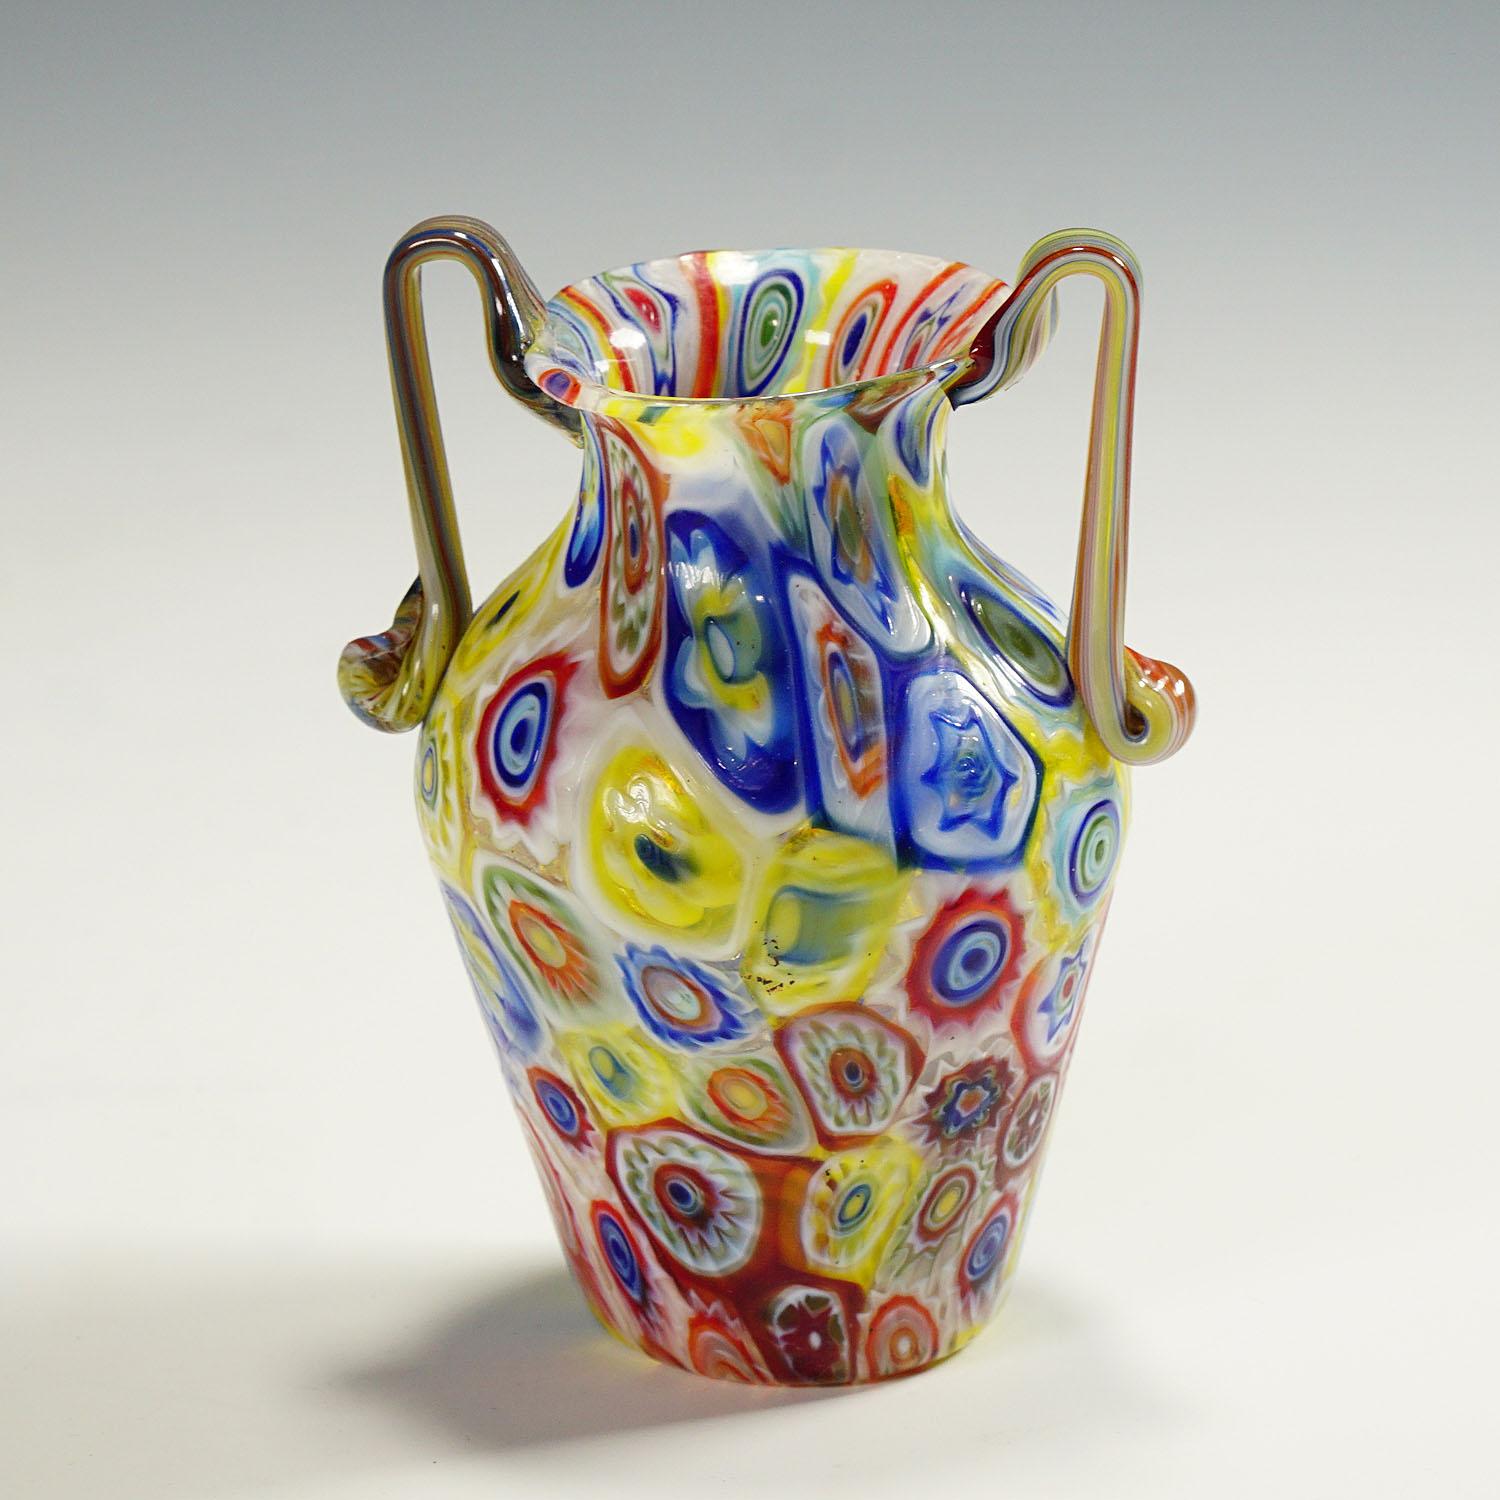 An antique Murano murrine glass vase, manufactured by Vetreria Fratelli Toso in the 1920s. The two handeled vase is executed in thin glass with multicoloured translucent millefiori murrines. Differently to the most Toso millefiori vases this example